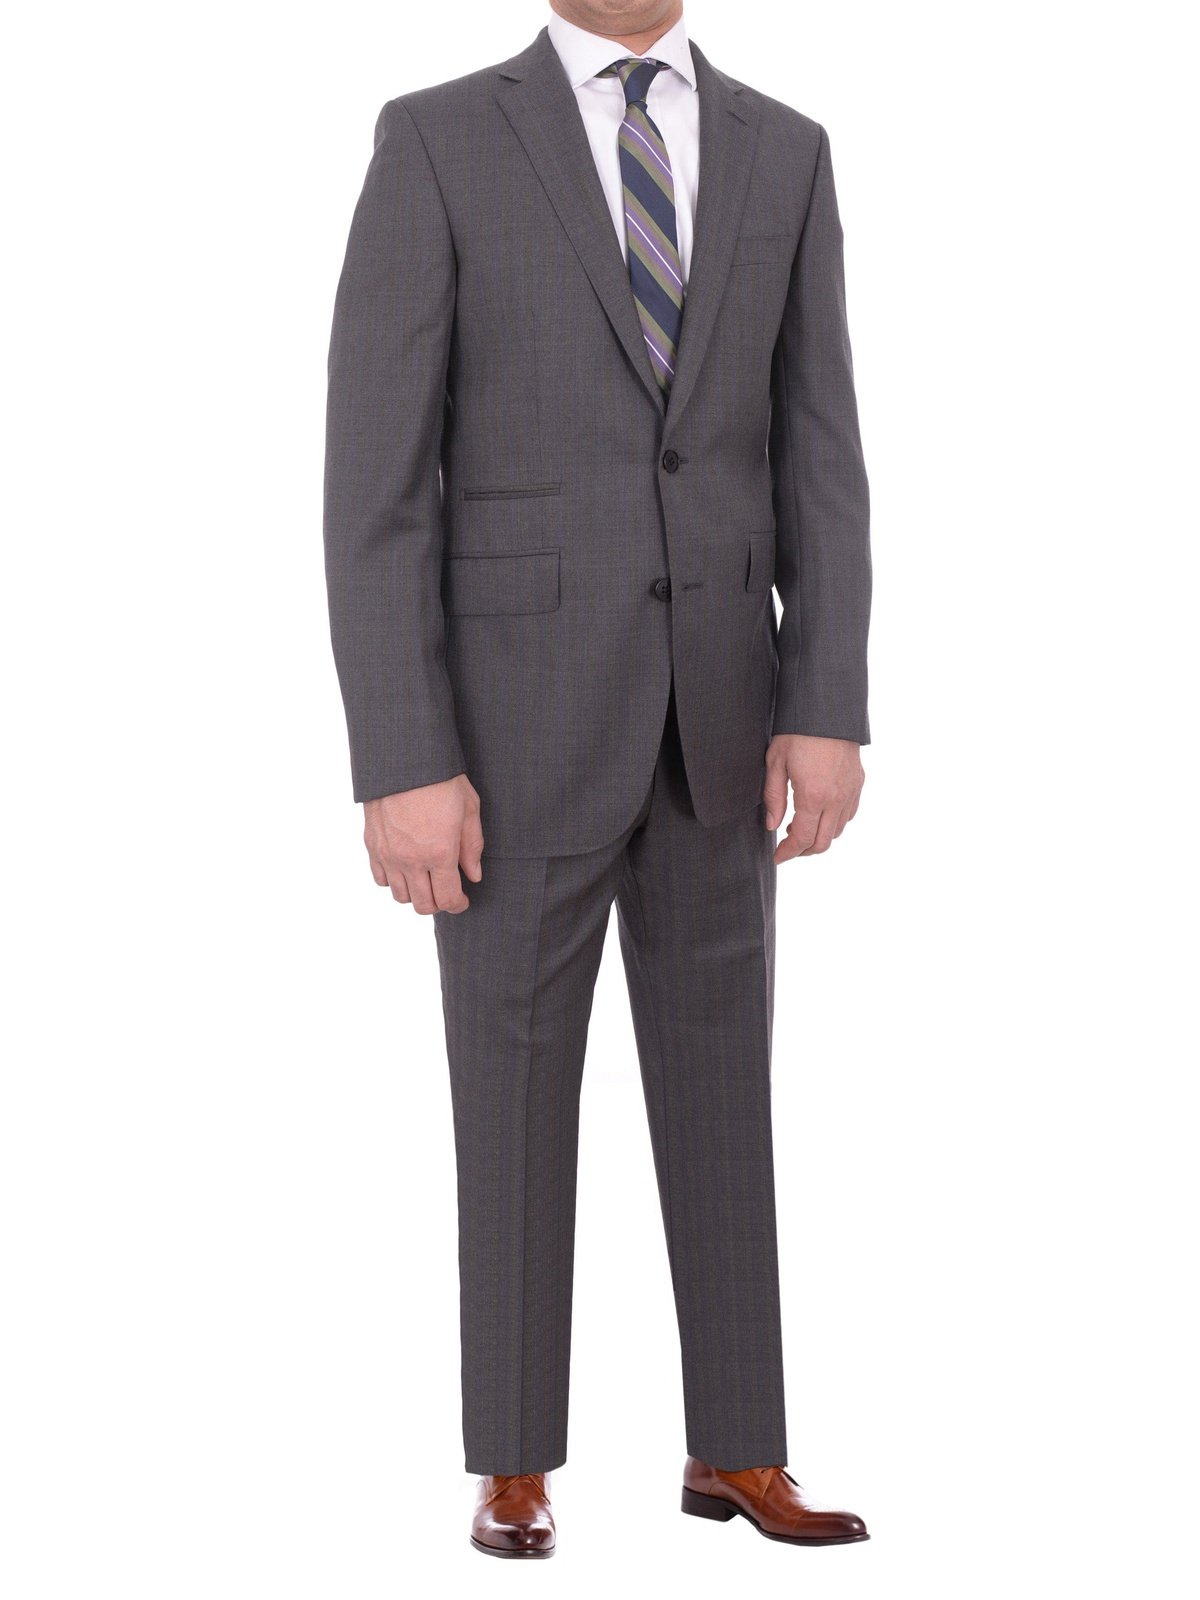 Napoli TWO PIECE SUITS Mens Napoli Slim Fit Heather Gray Half Canvassed Wool Suit Ticket Pocket